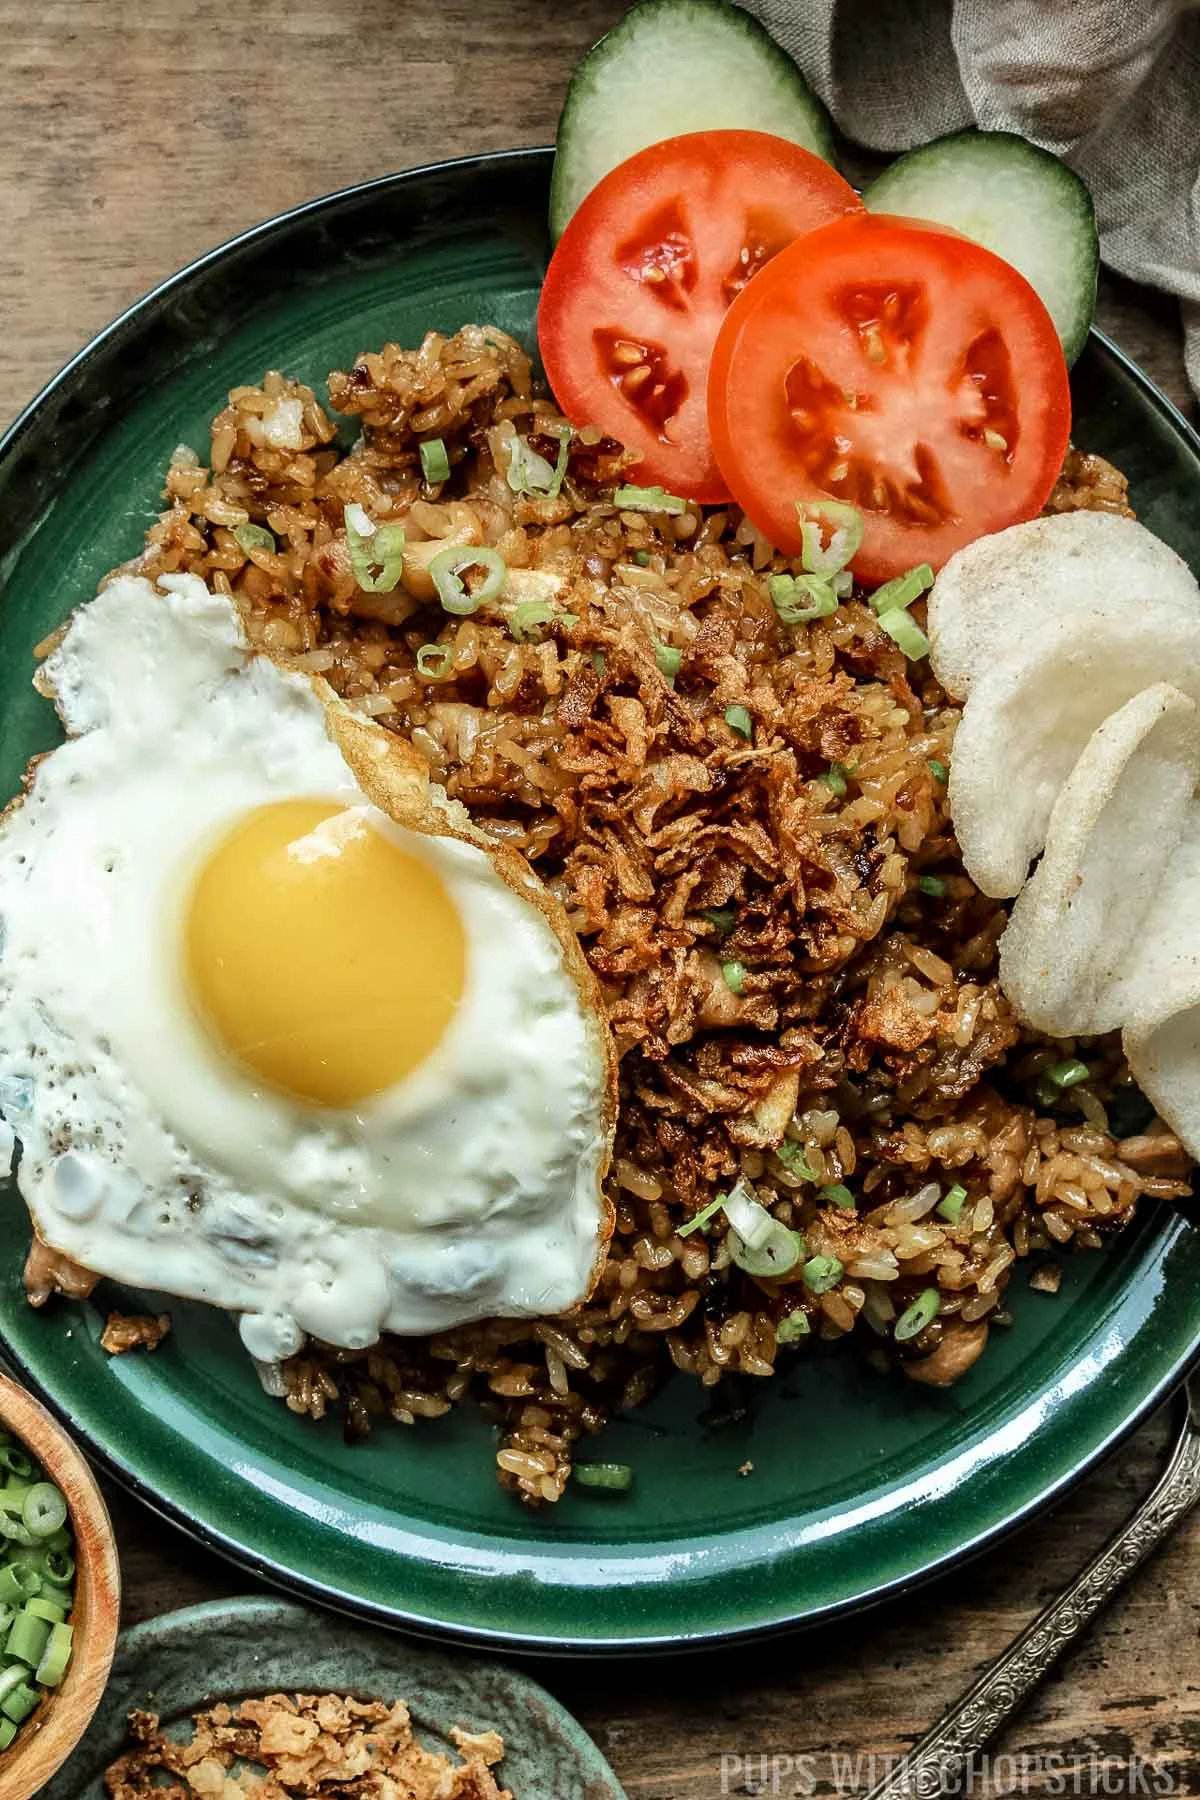 Nasi goreng (Indonesian fried rice) with prawn crackers, fried egg on a green plate.